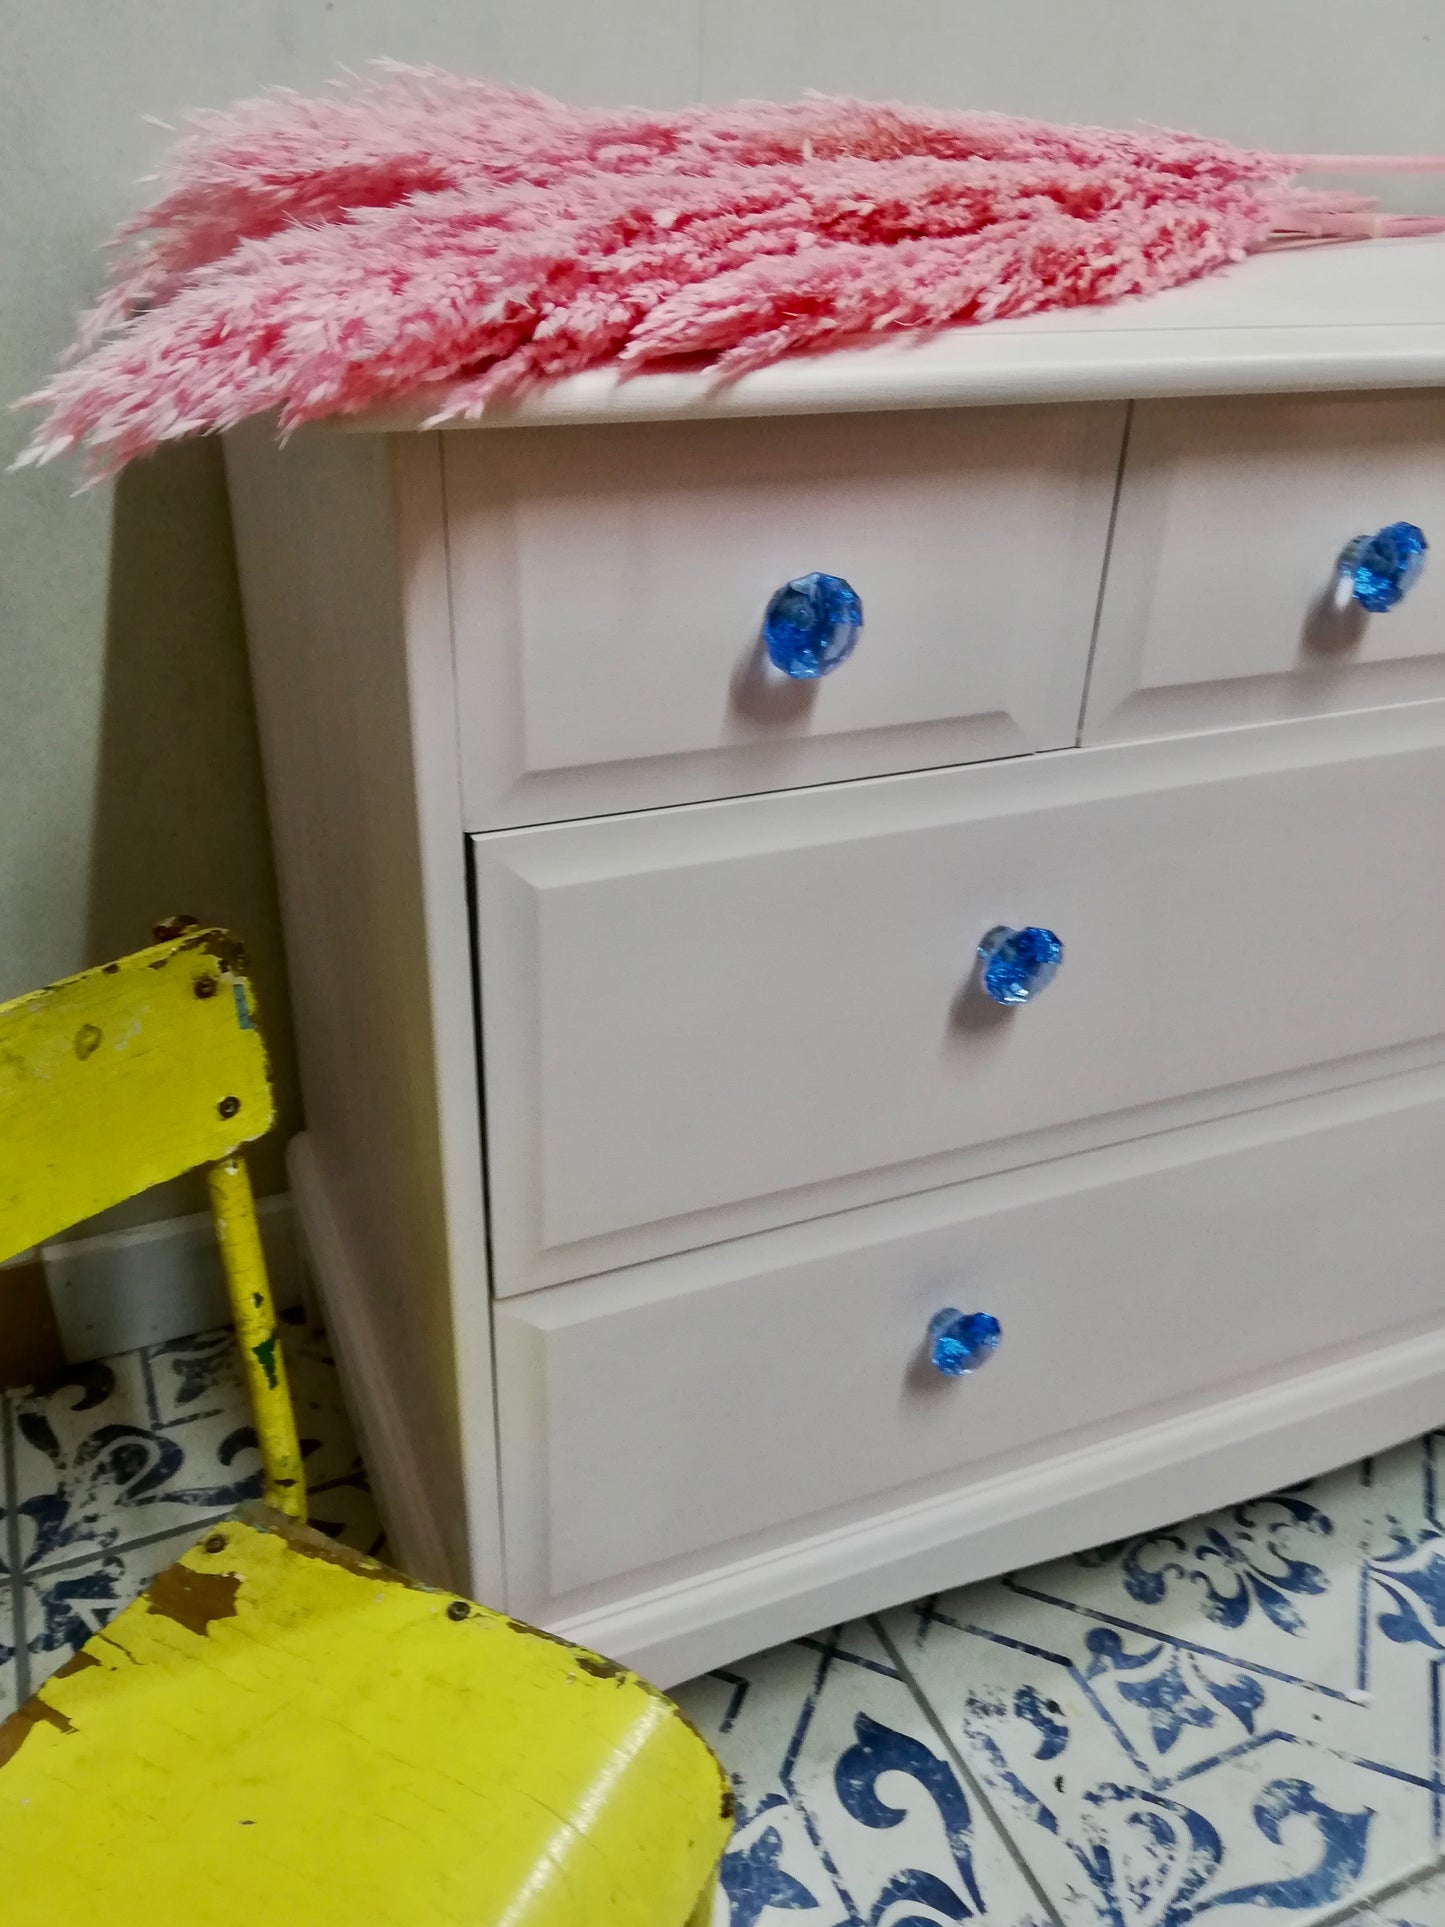 Commission for Fiona painted vintage chest of drawers